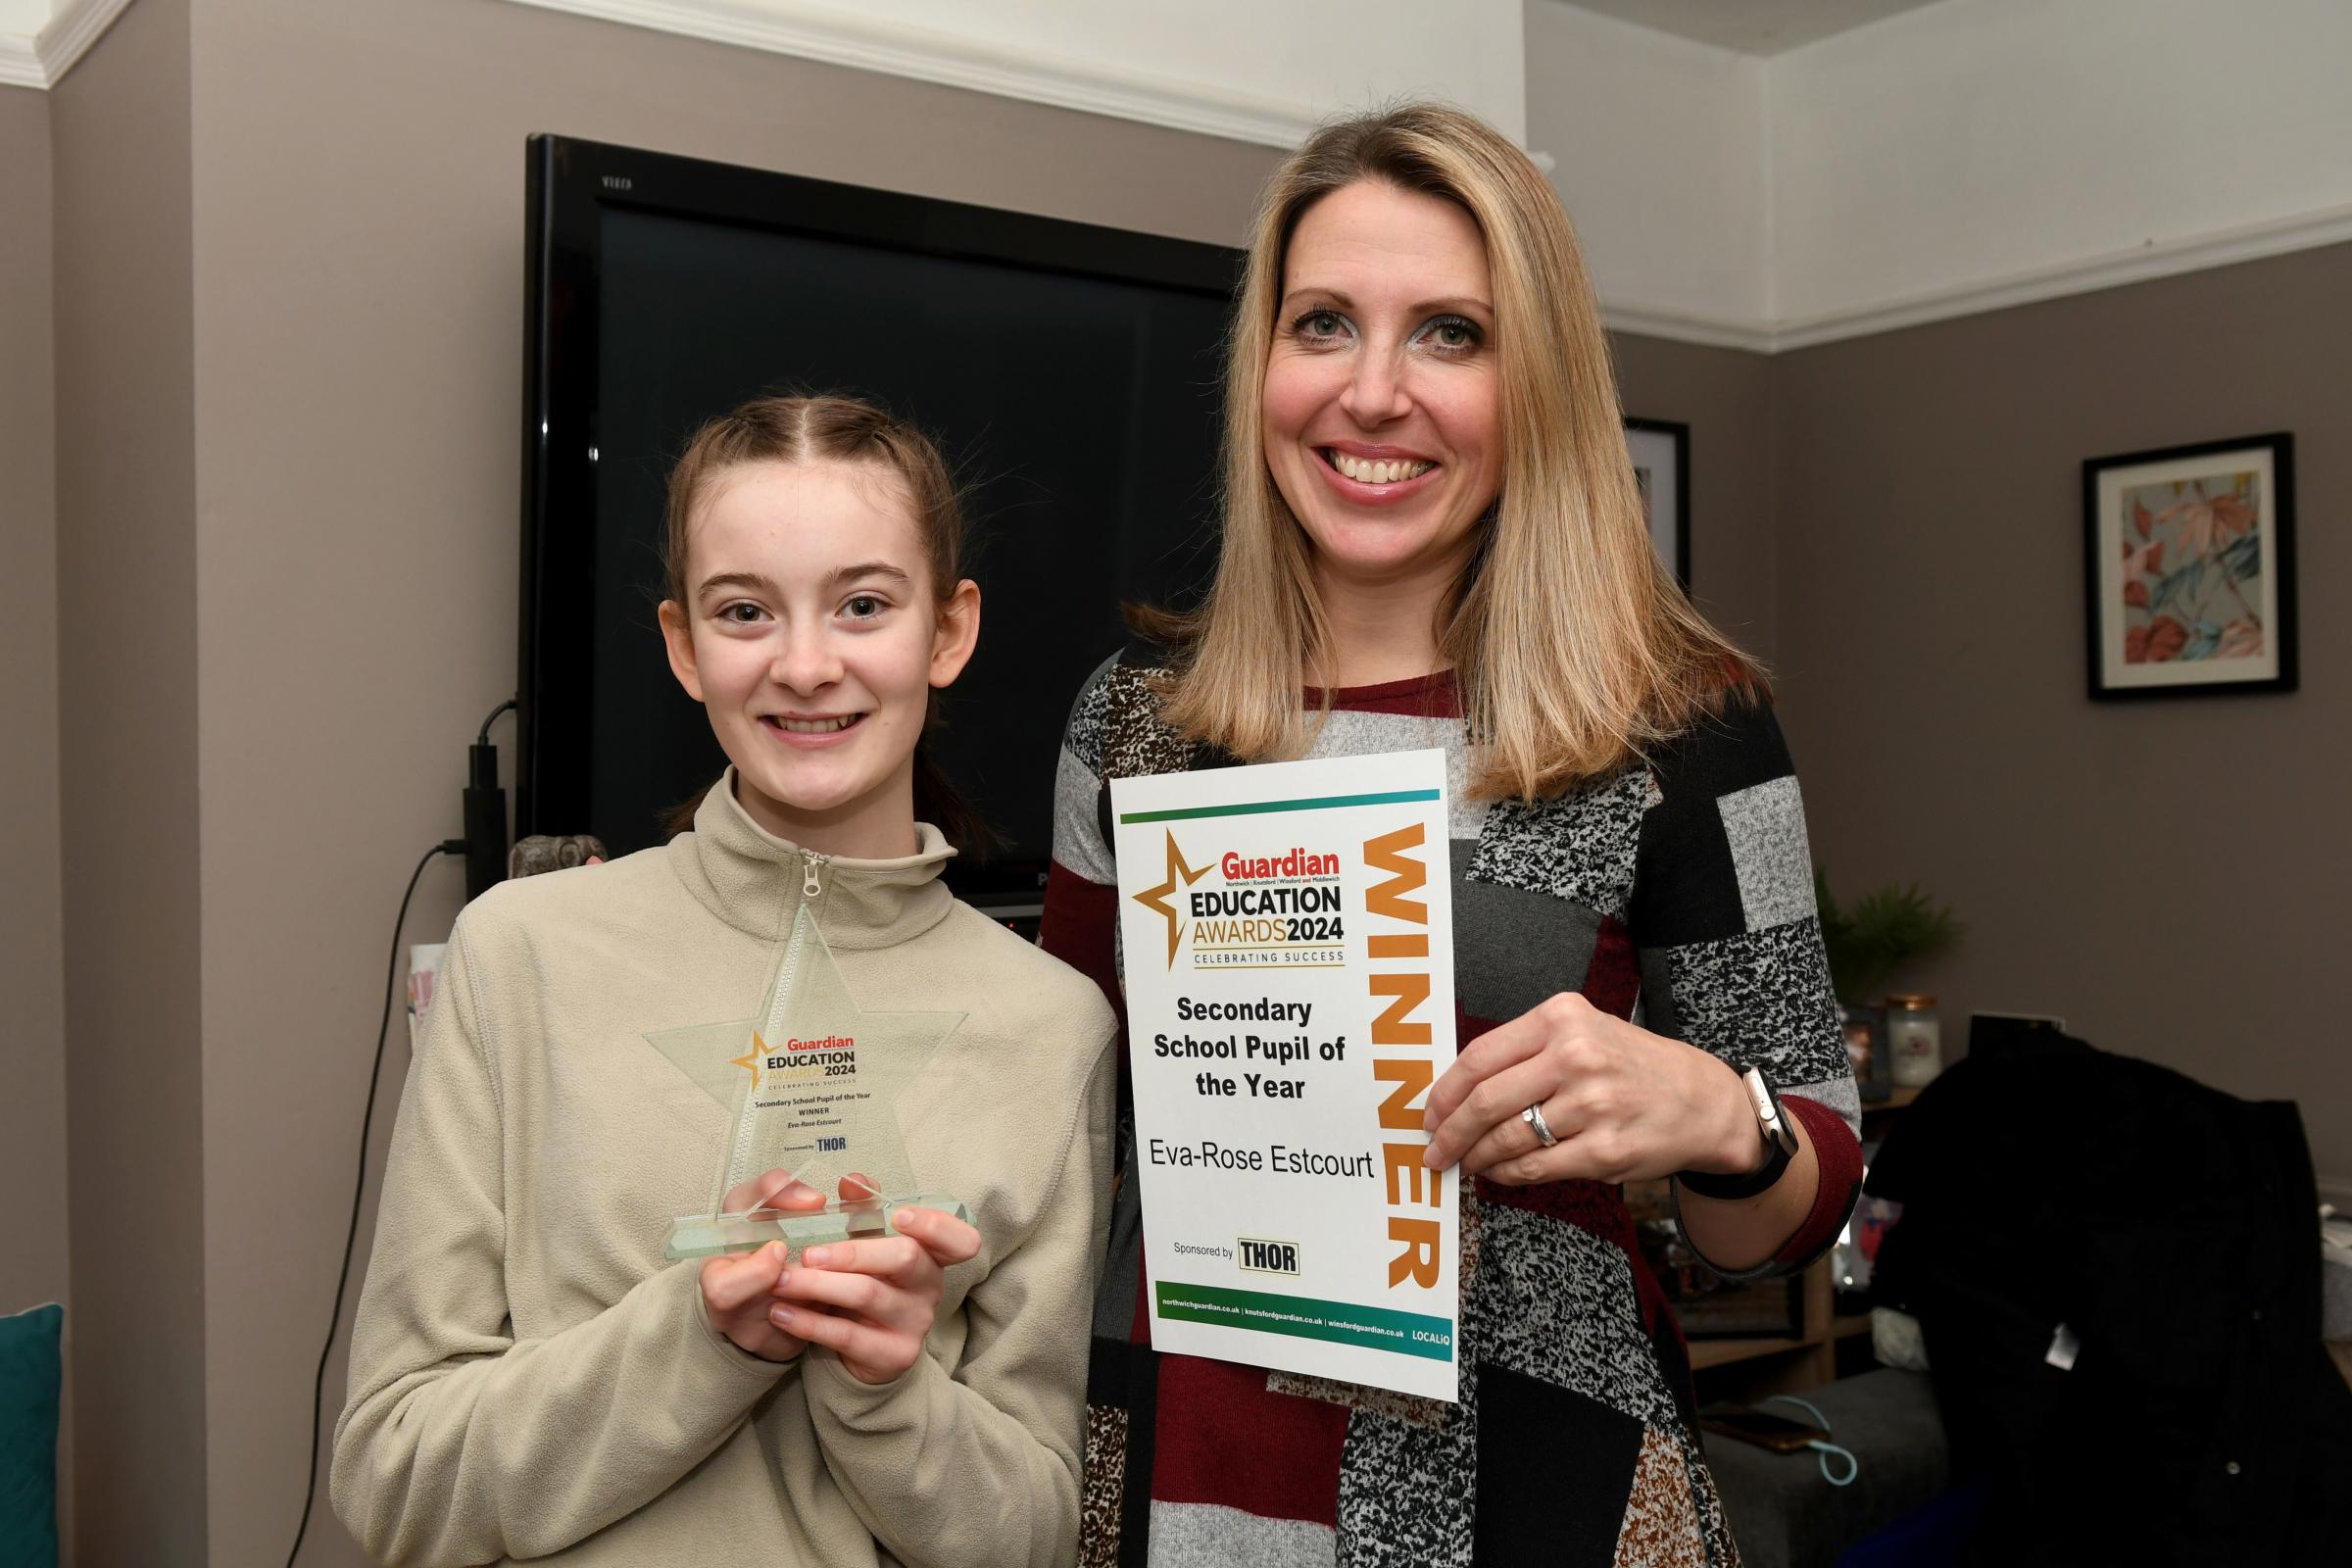 Eva-Rose Estcourt was presented with the Secondary School Pupil of the Year Award by the Northwich and Winsford Guardians Heidi Summerfield